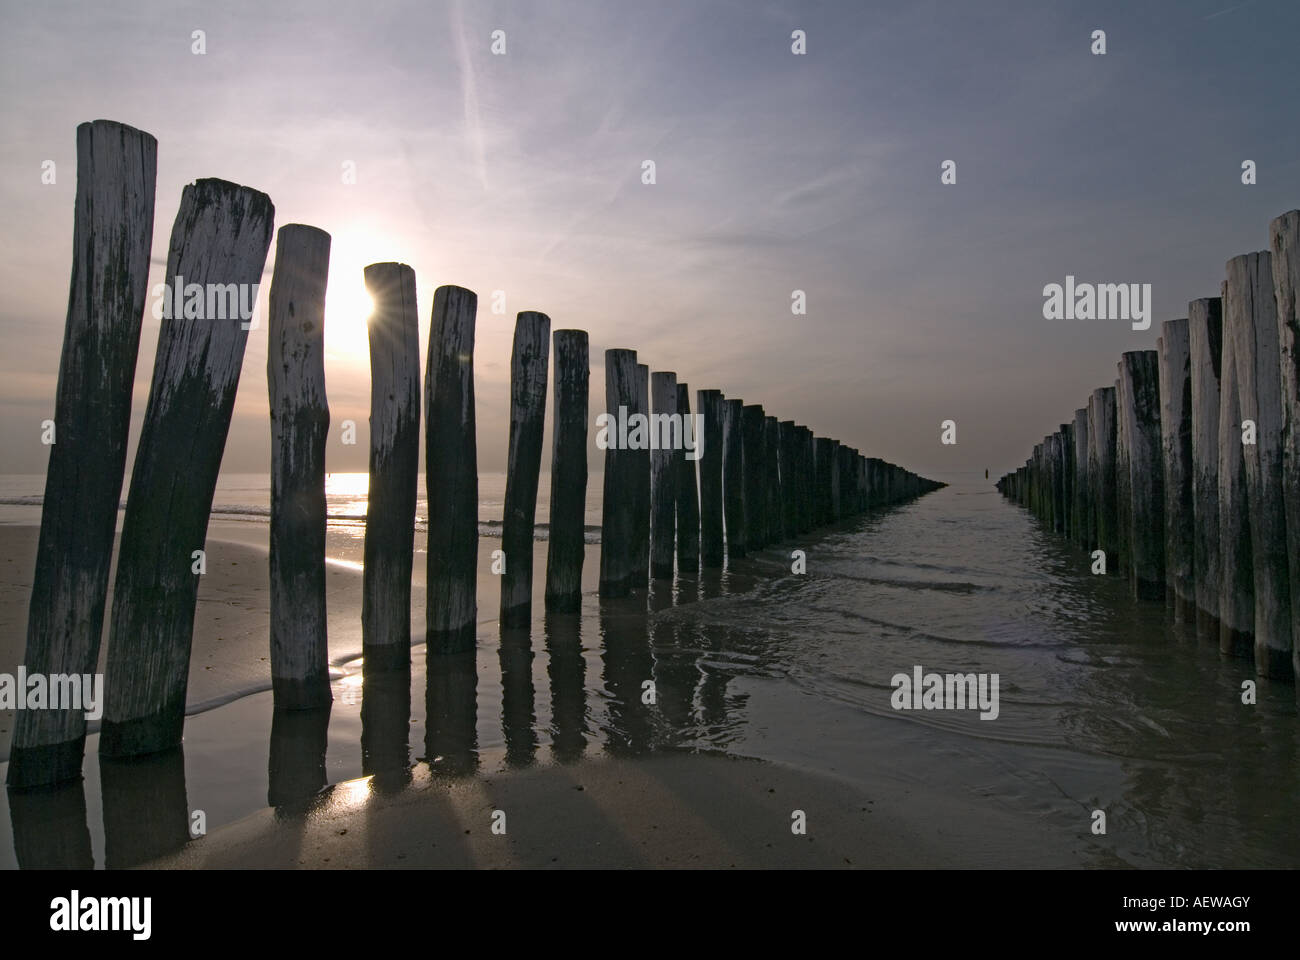 Breakers on the beach of Domburg Netherlands by a sunset Stock Photo